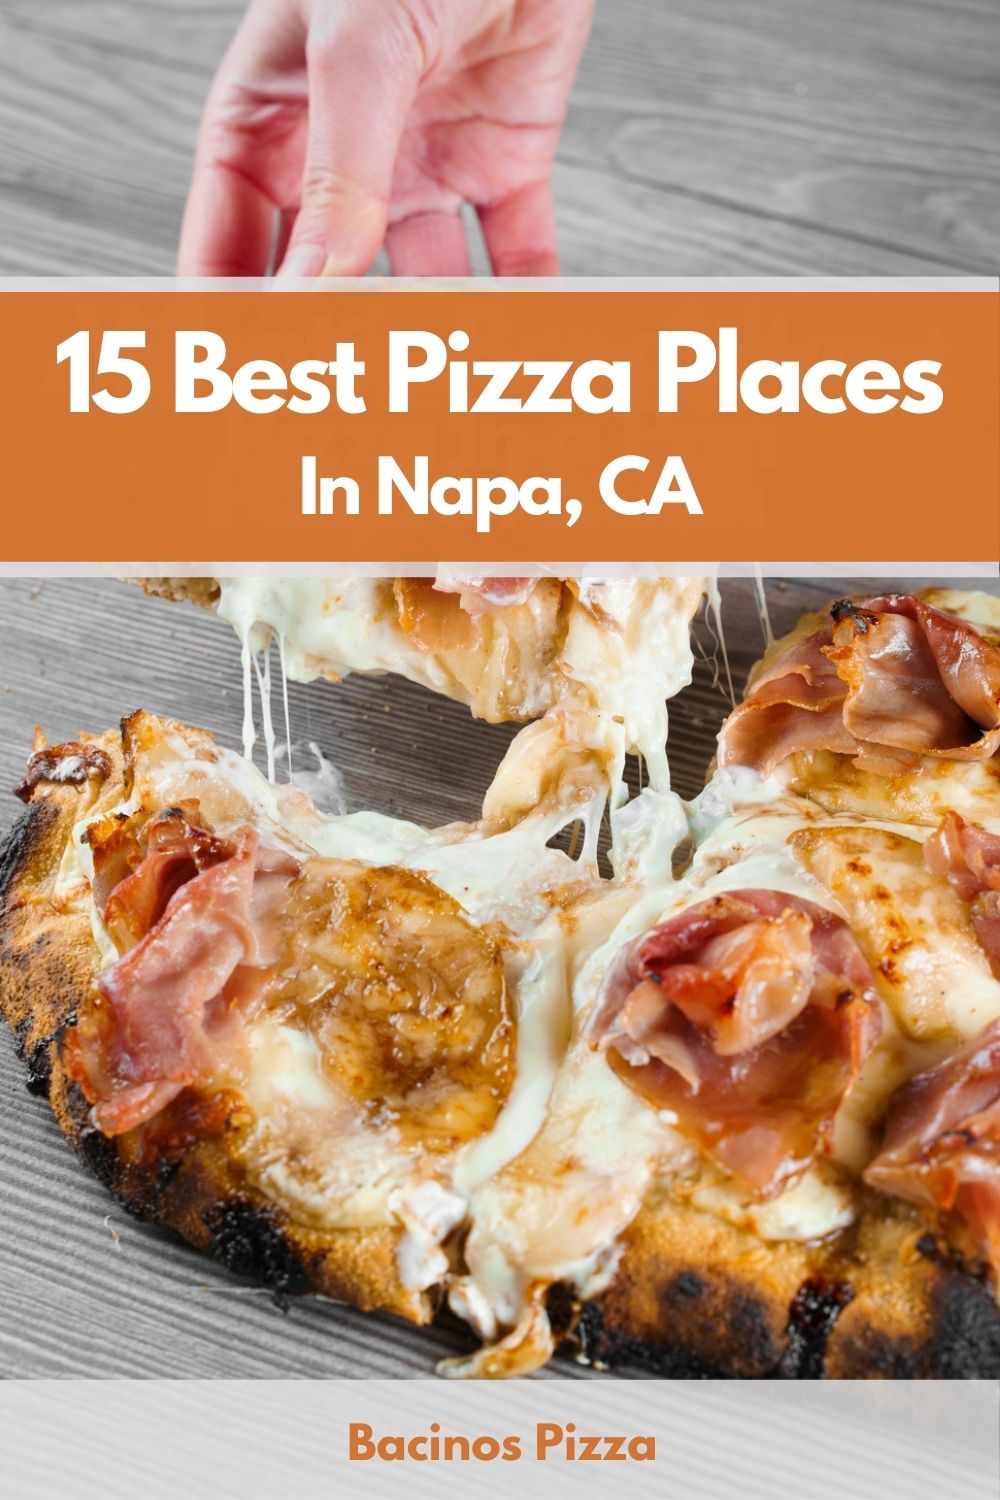 15 Best Pizza Places In Napa, CA pin 2